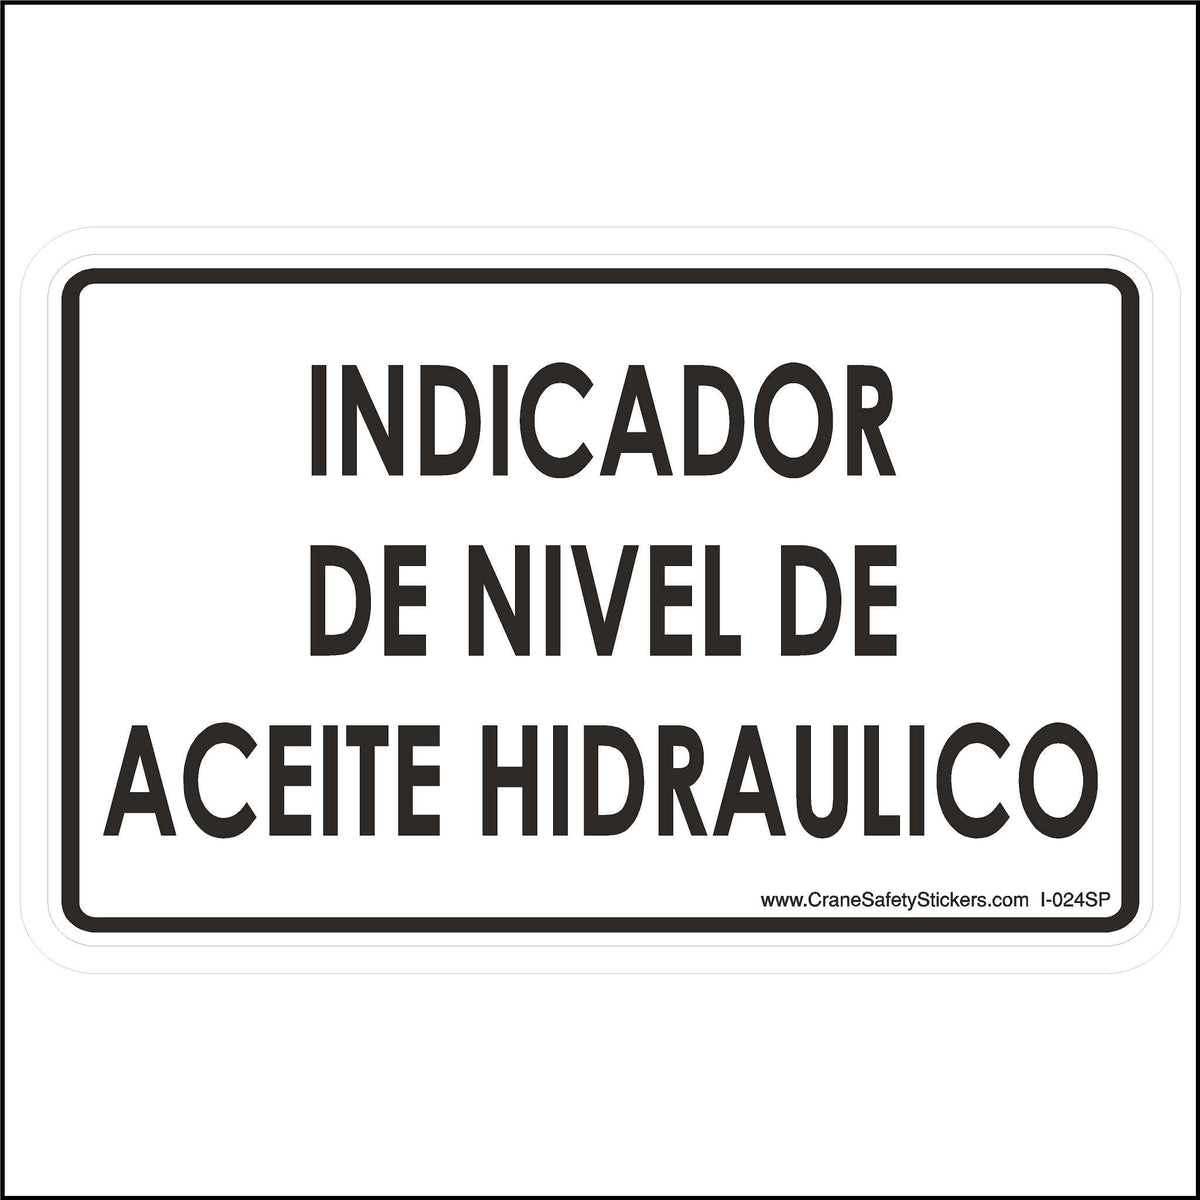 This Spanish Hydraulic Oil Sight Level Gauge Label is Printed With. INDICADOR DE NIVEL DE ACEITE HIDRAULICO.  The English Translation is Hydraulic Oil Sight Level Gauge.